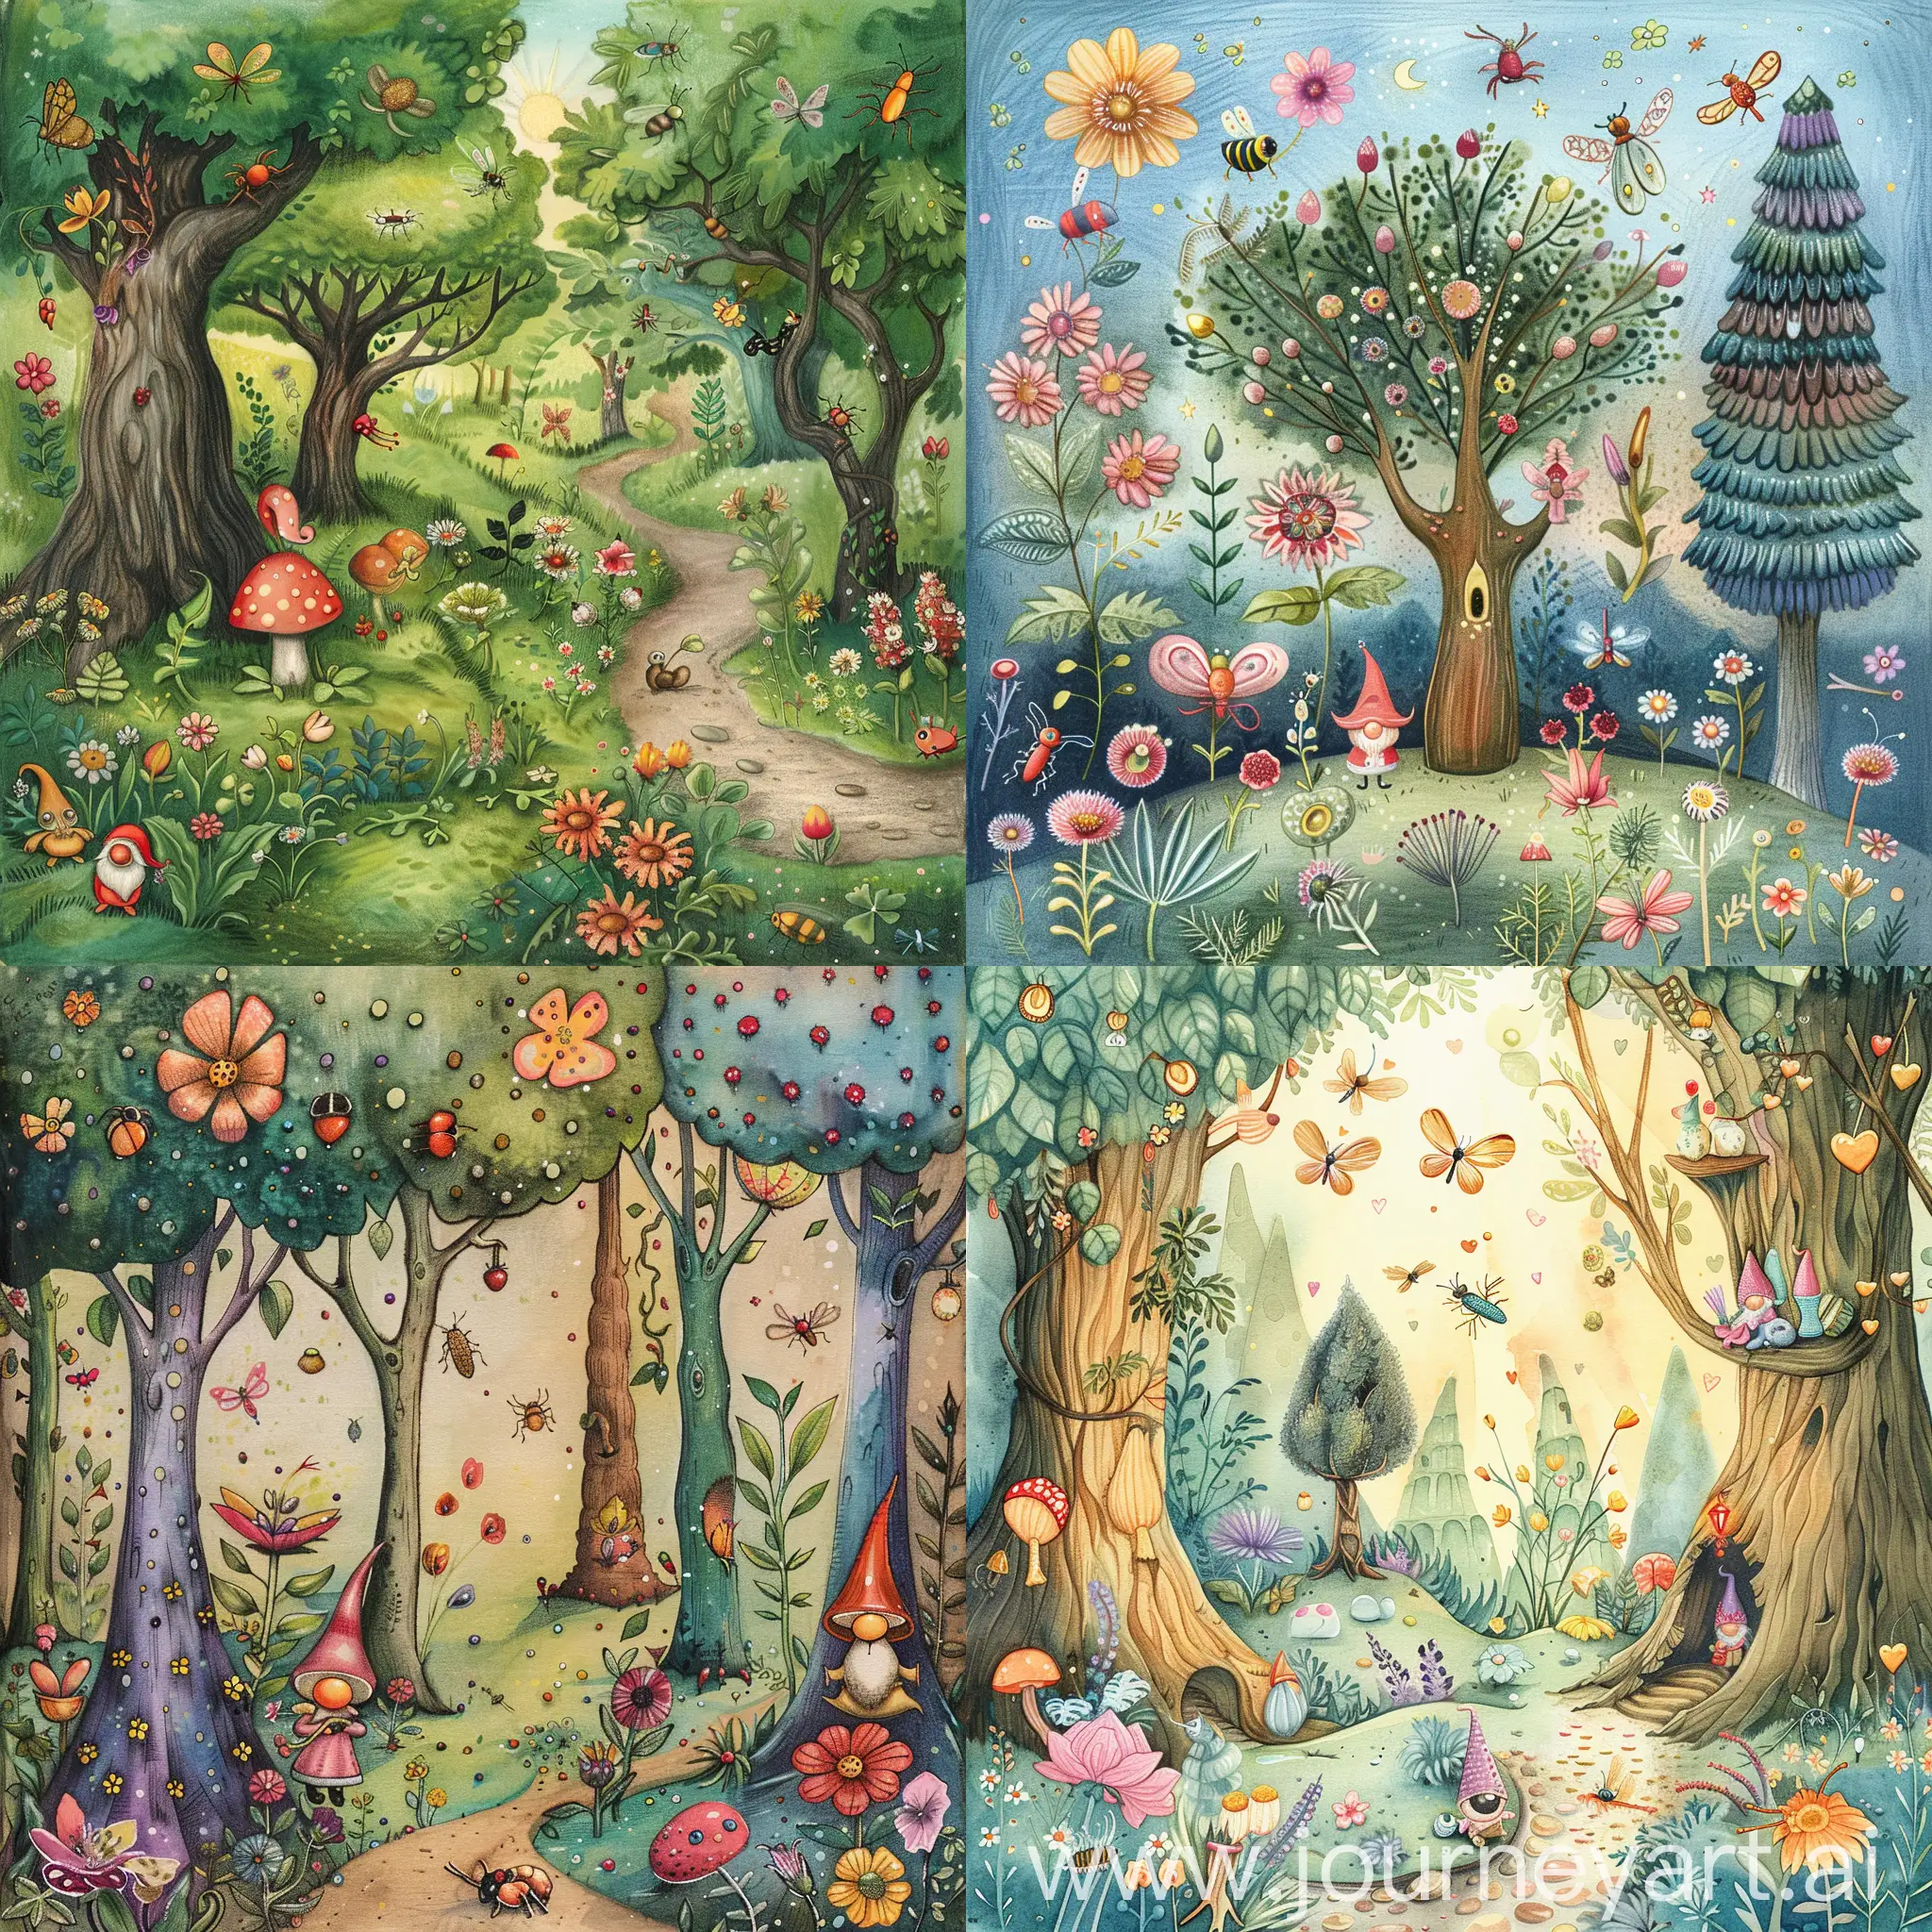 Enchanting-Magical-Forest-Illustration-Whimsical-Trees-Cute-Gnomes-Beautiful-Insects-and-Amazing-Flowers